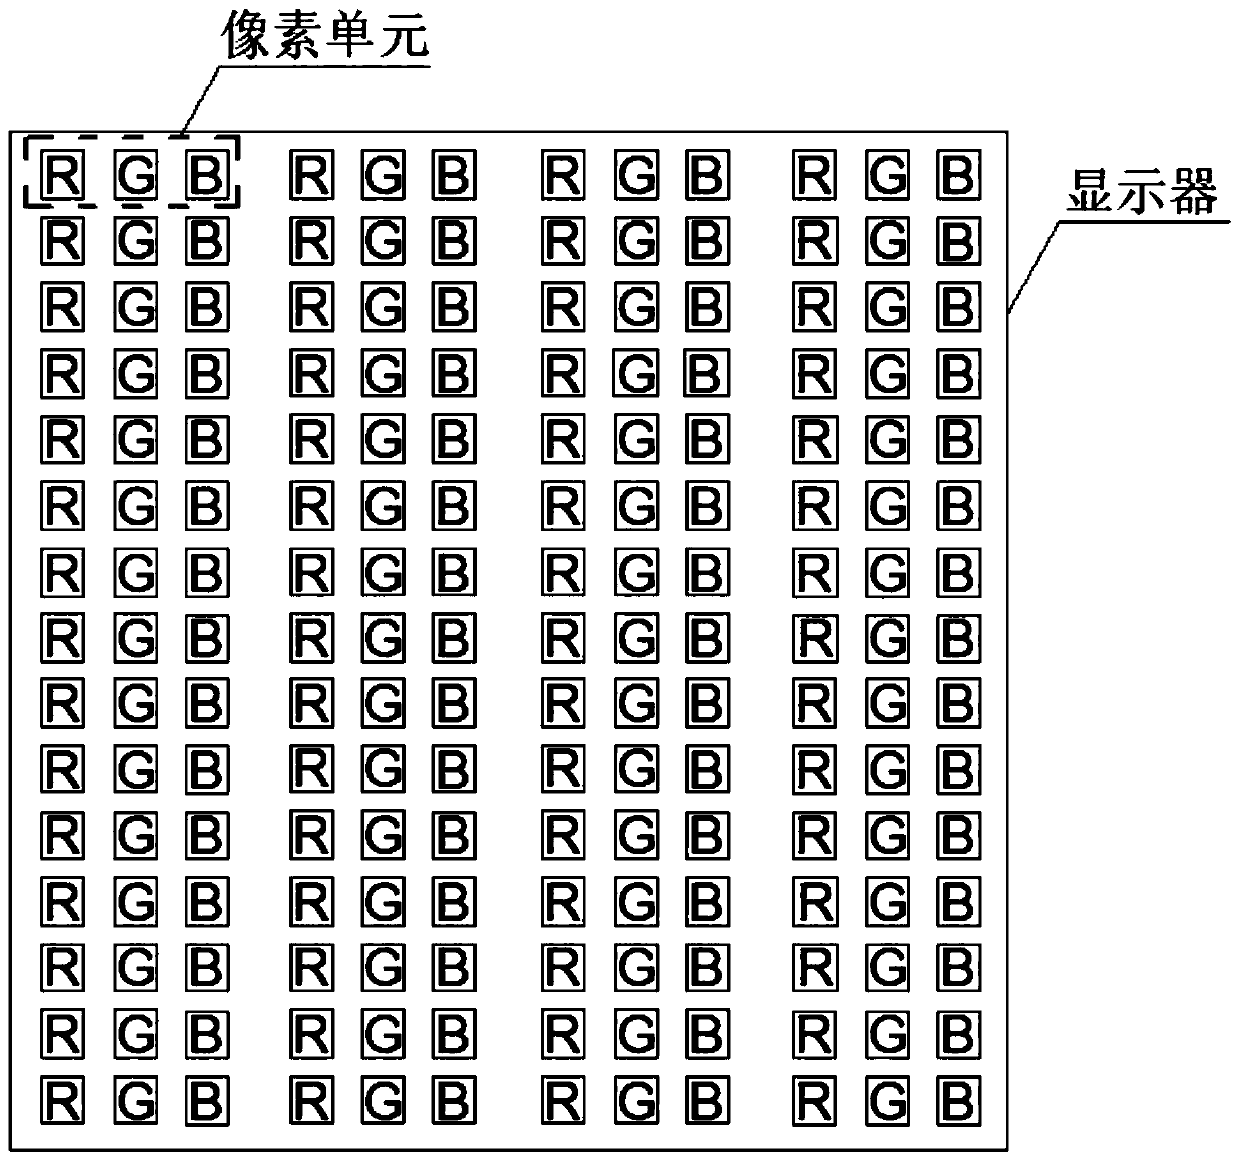 Display substrate and display device